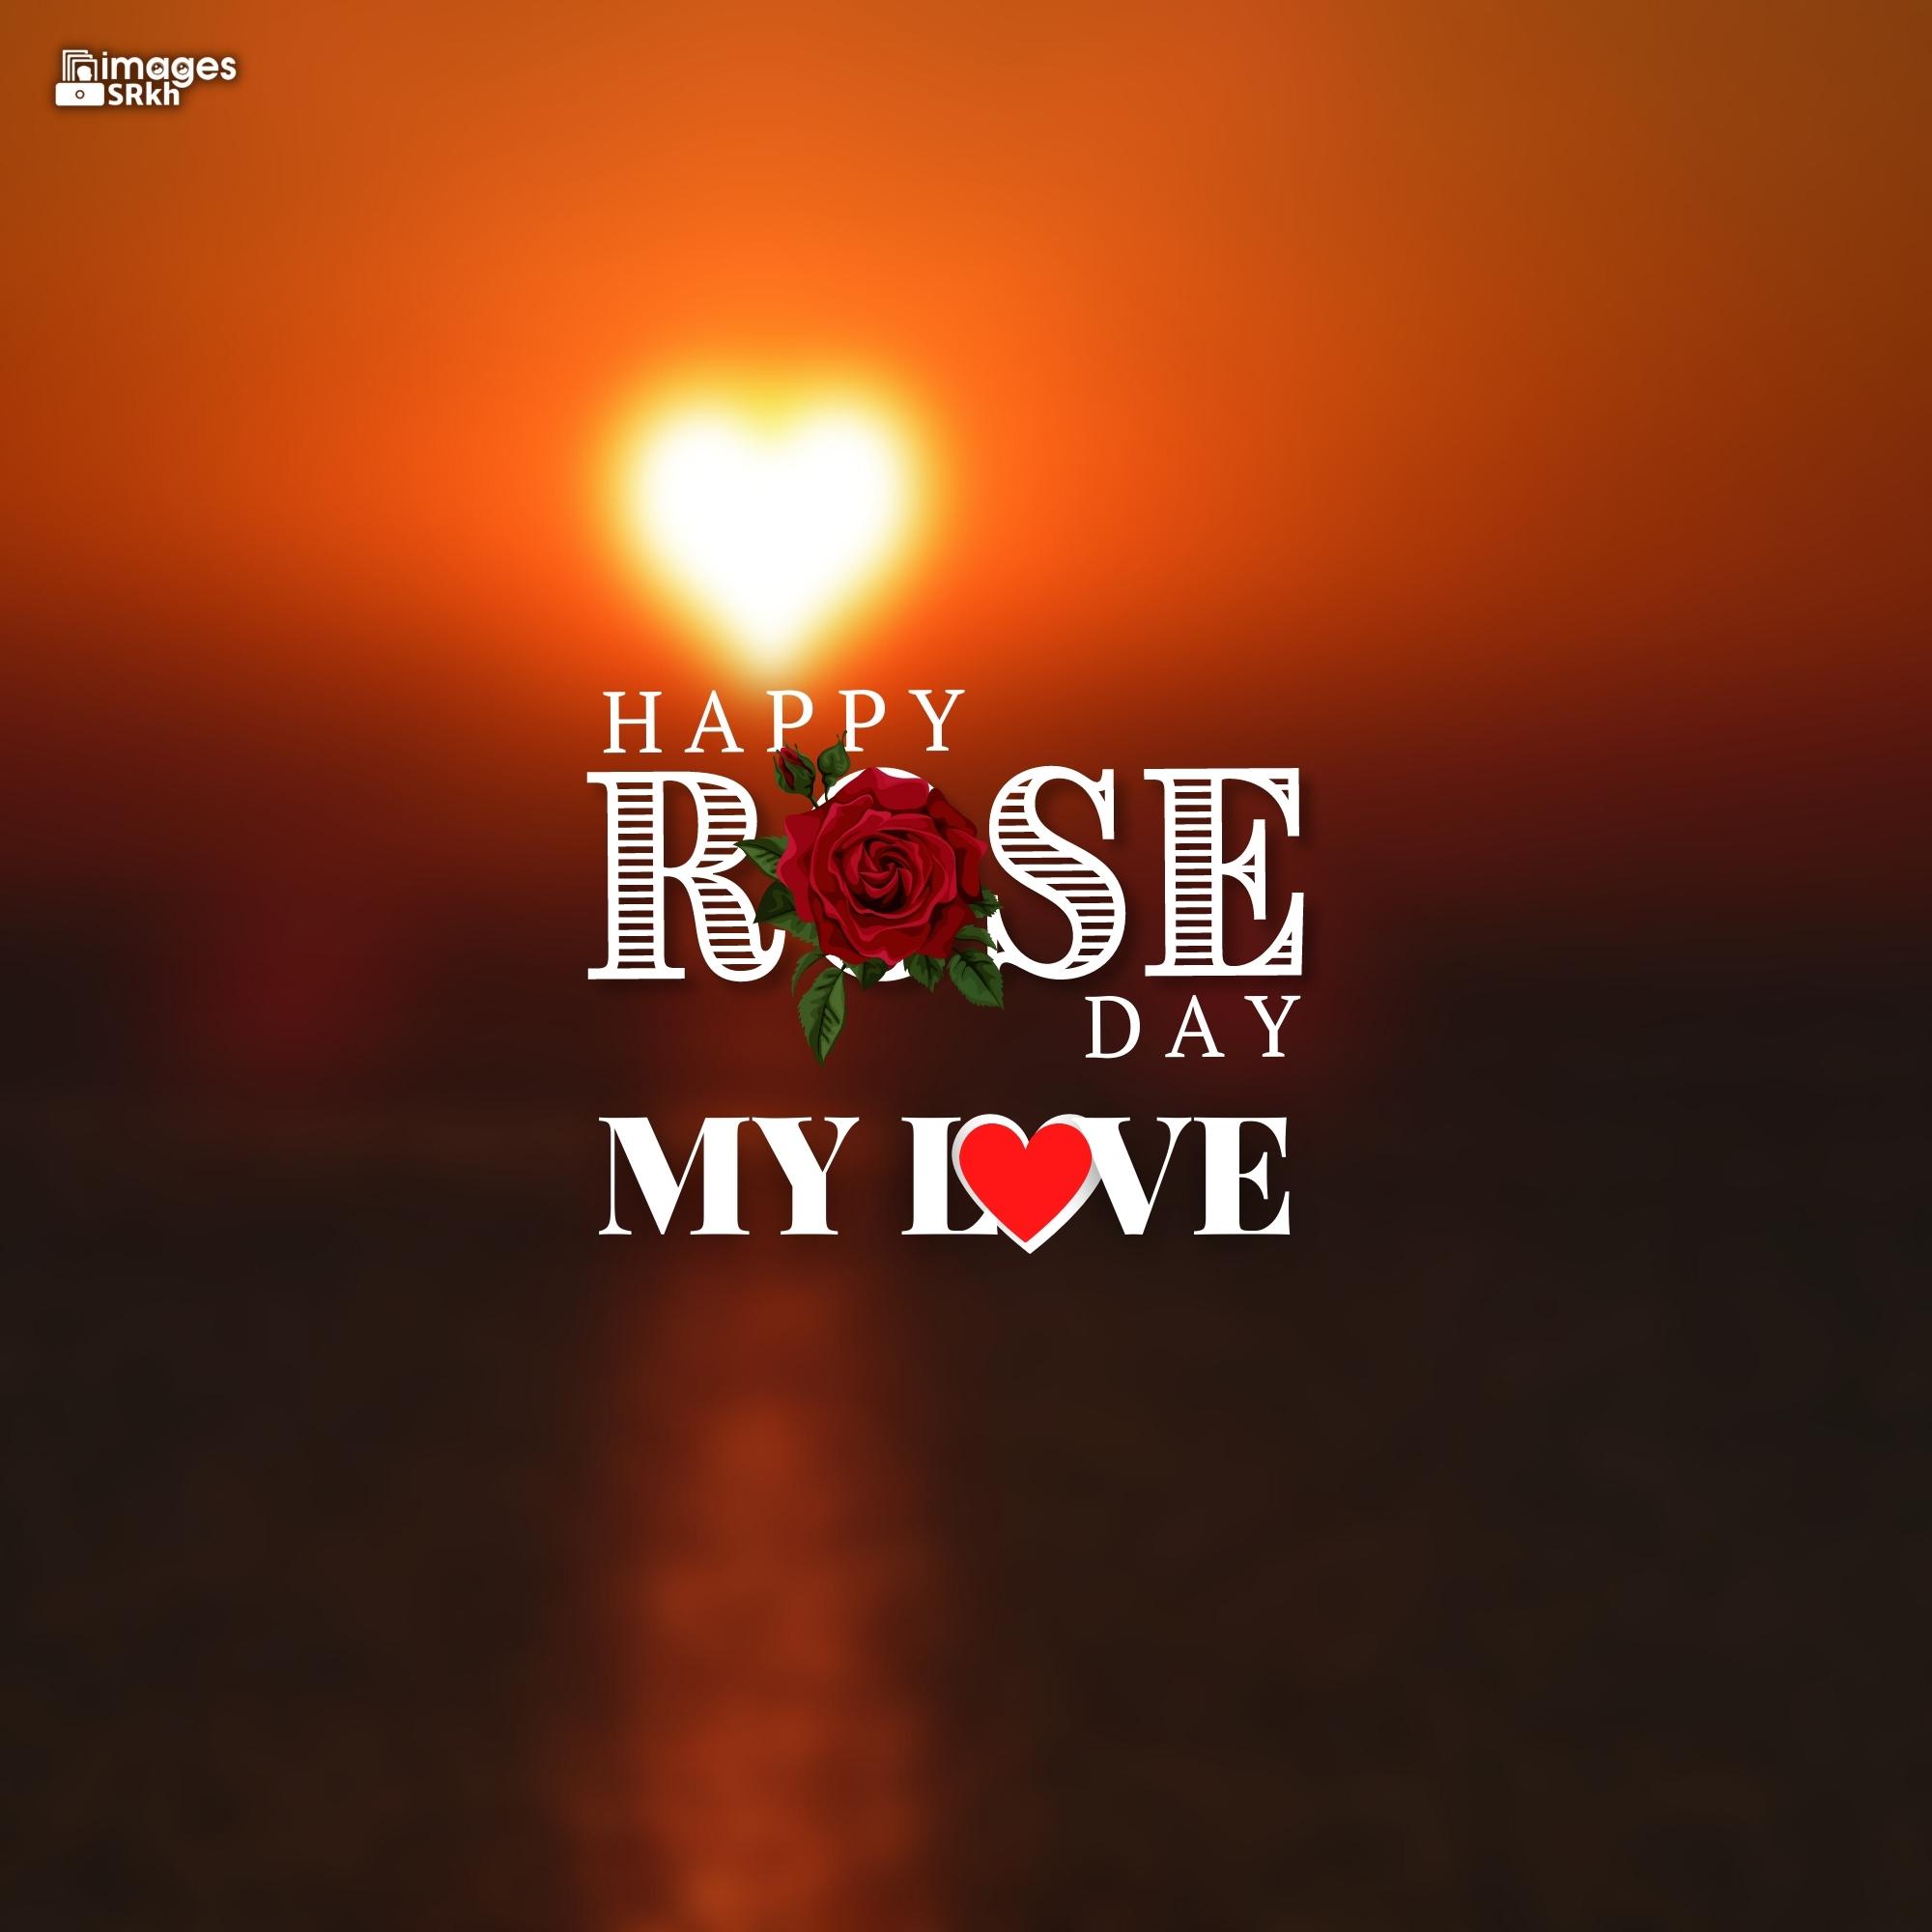 Happy Rose Day My Love (4) | HD IMAGES